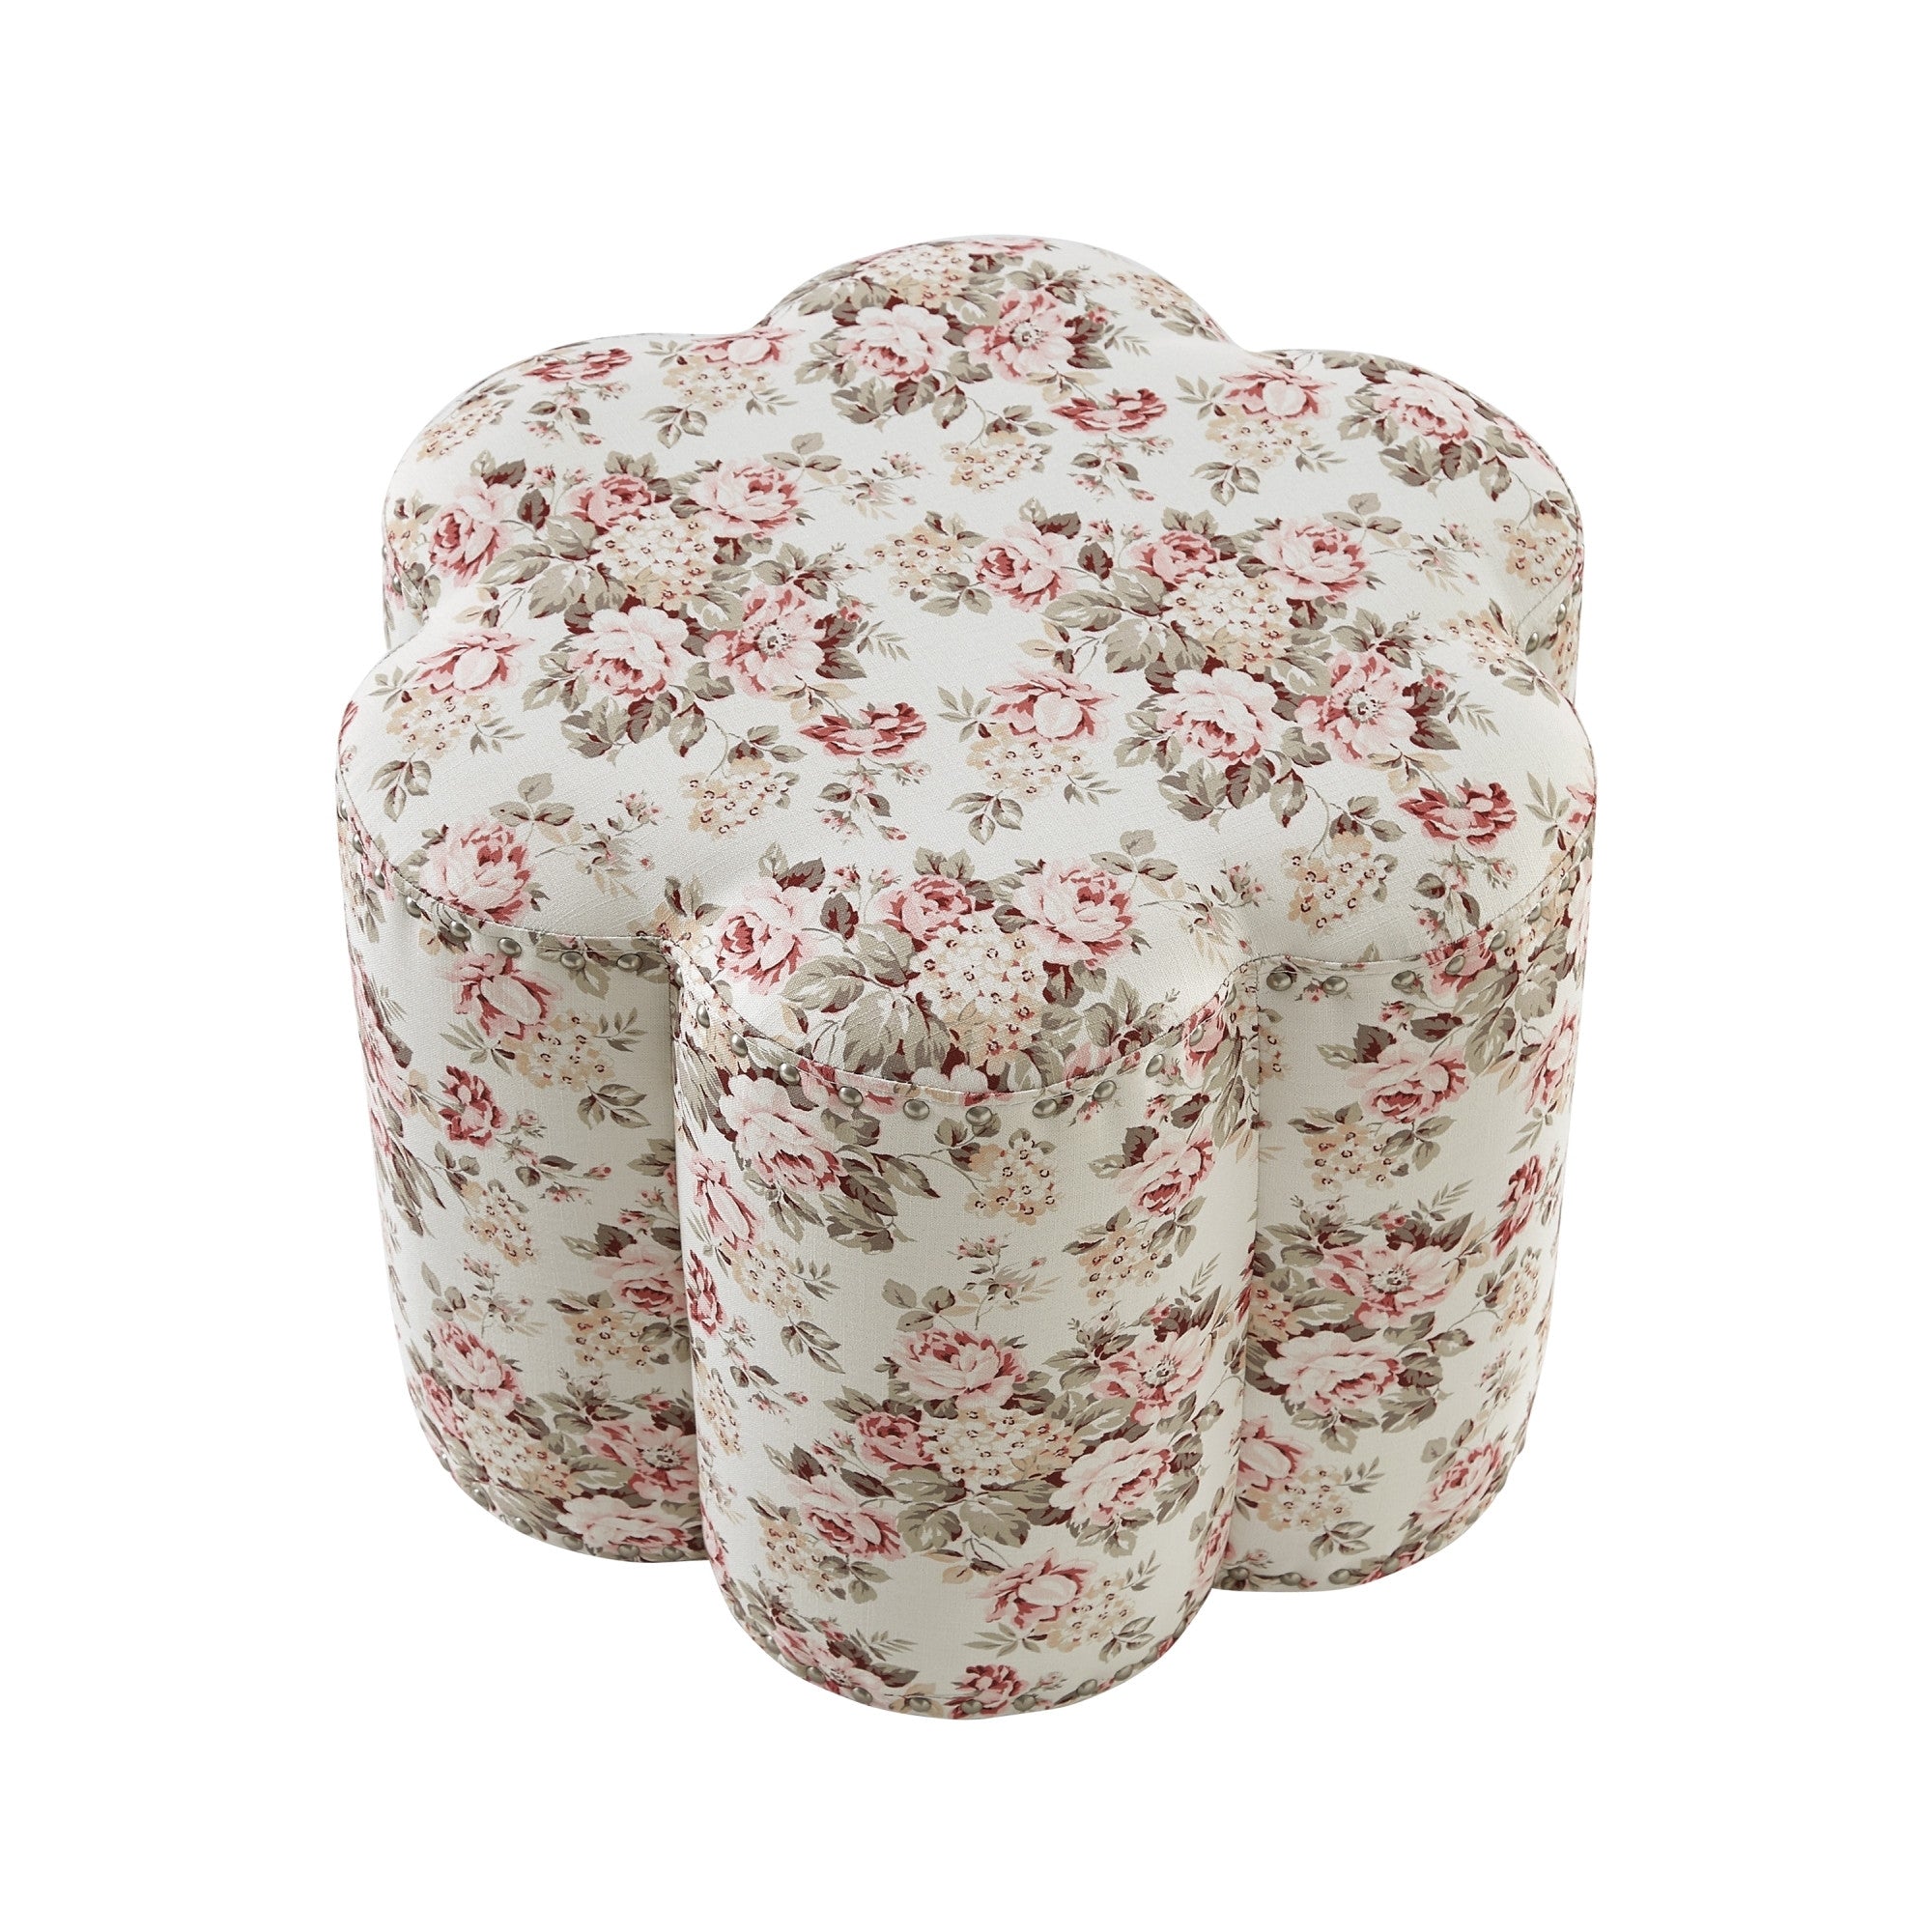 25" Ivory Linen Specialty Ottoman